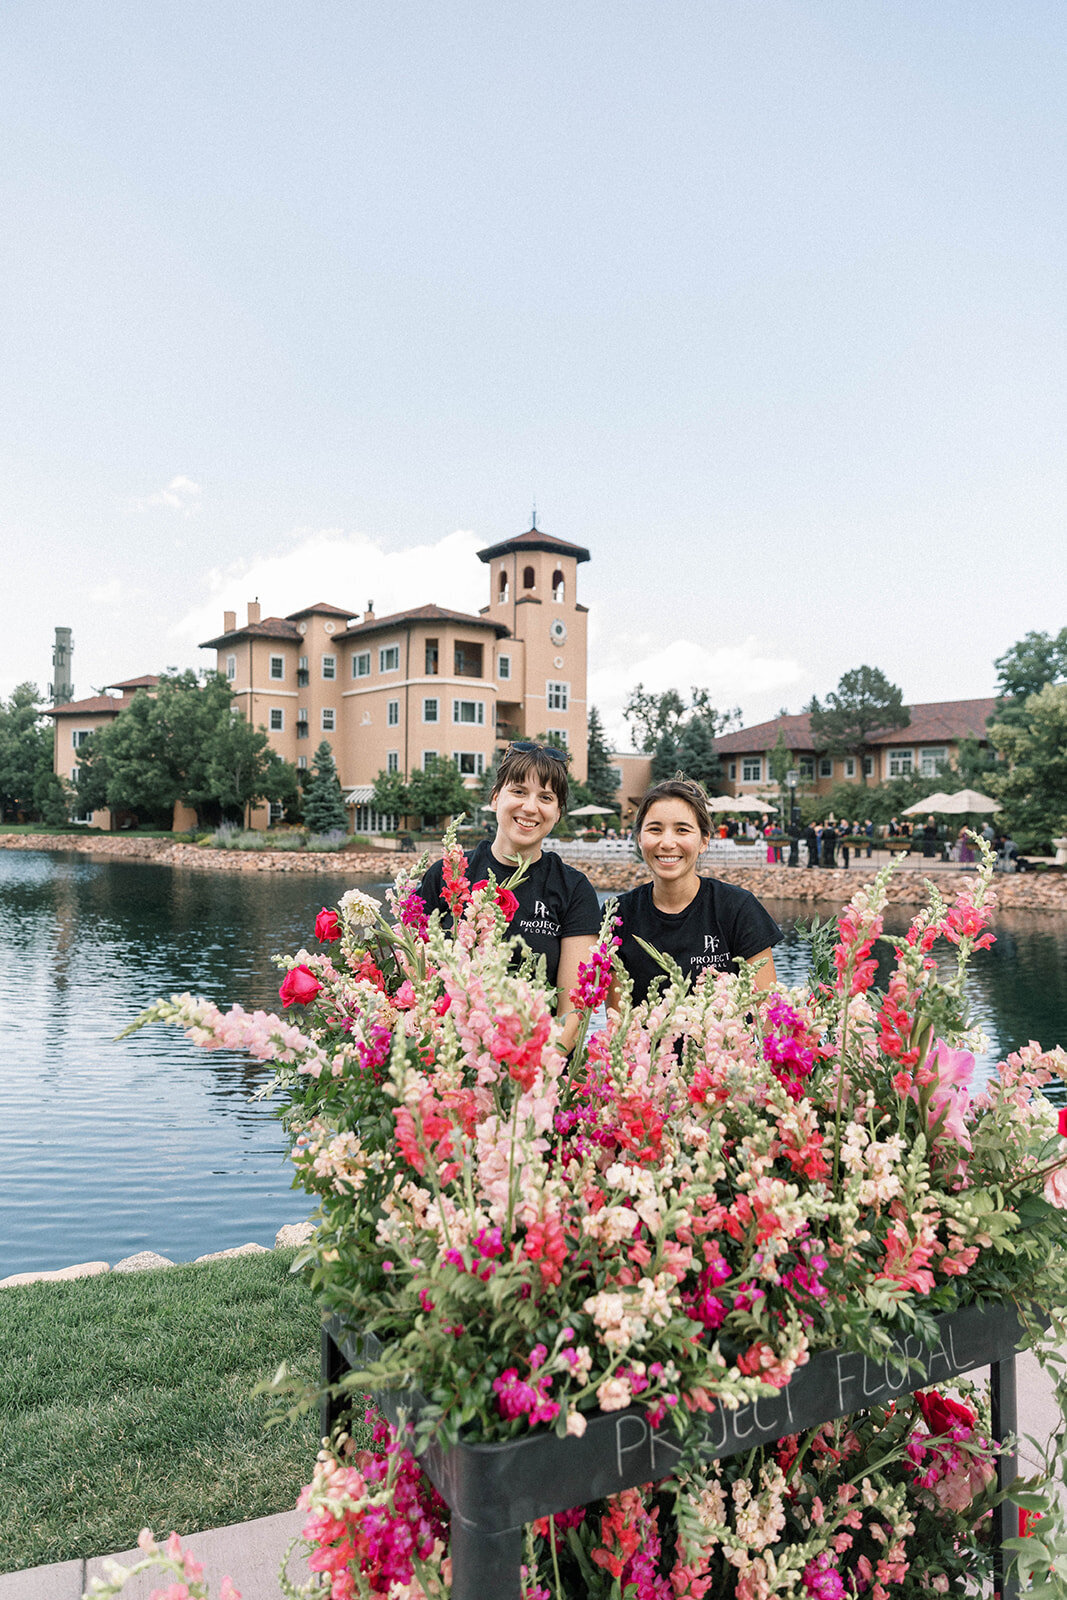 M%2bE_The_Broadmoor_Lakeside_Terrace_Wedding_Vendors_by_Diana_Coulter-5